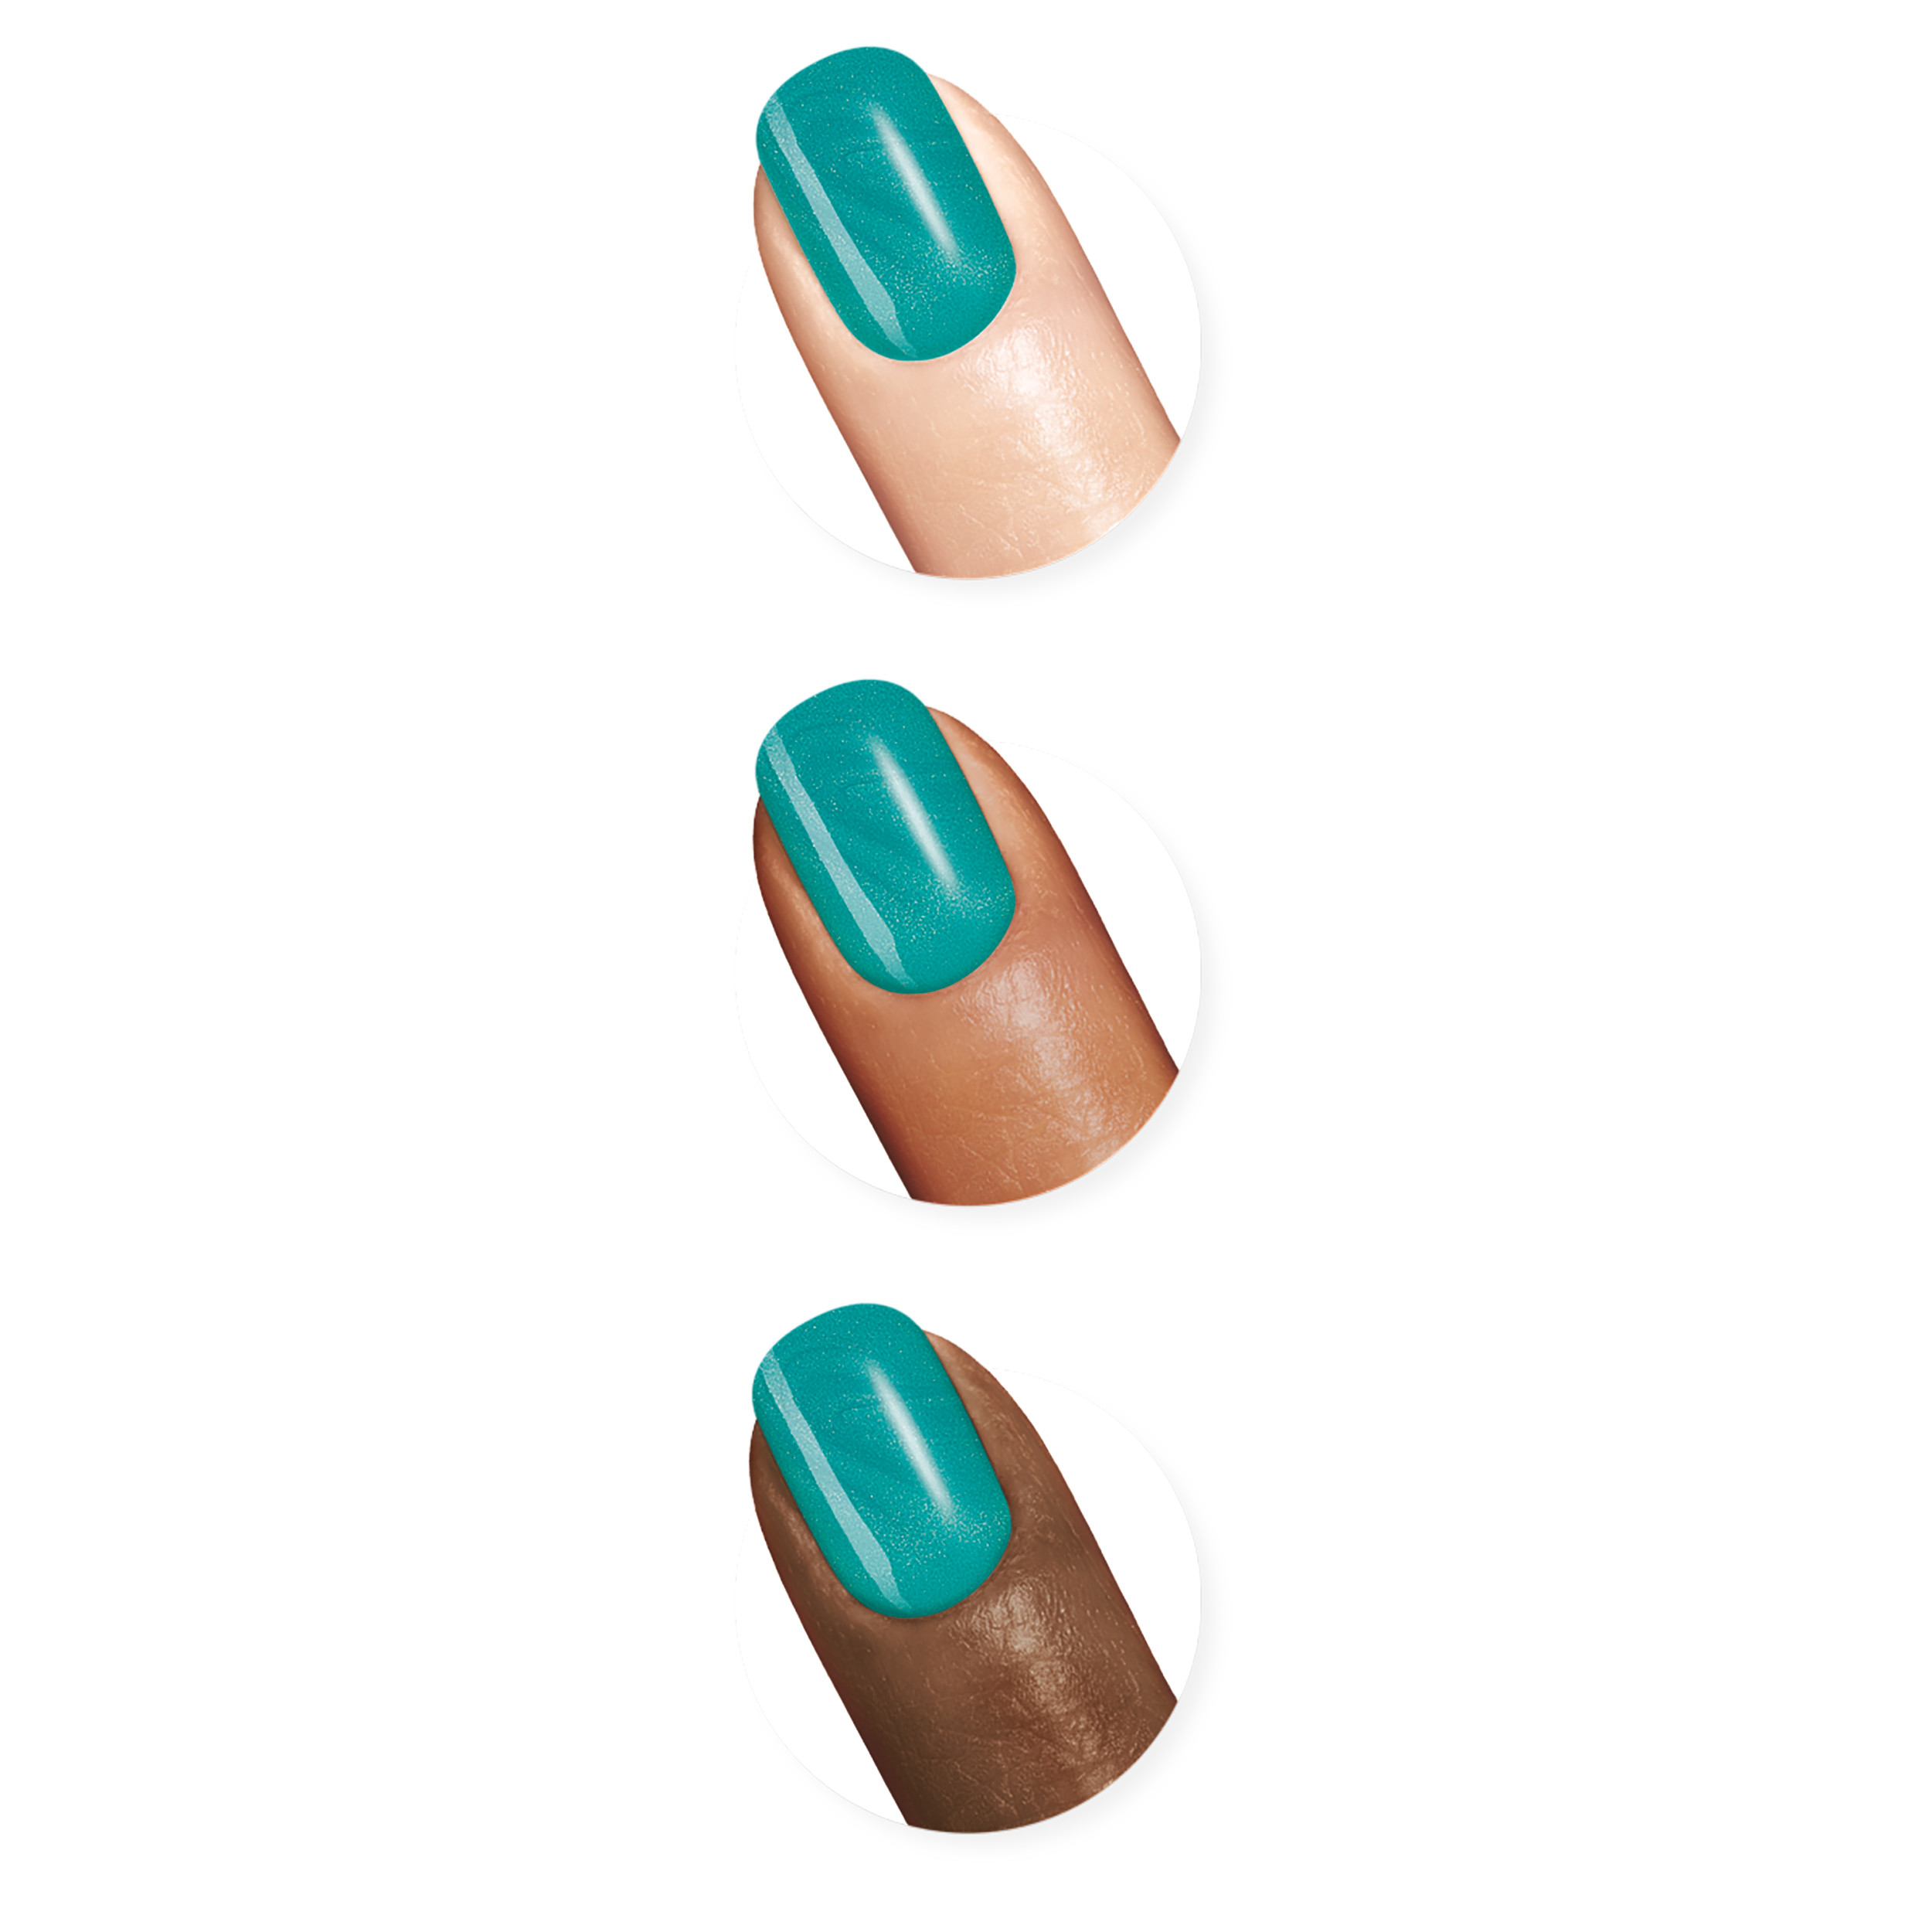 Sally Hansen Xtreme Wear Nail Color, Jazzy Jade, 0.4 oz, Color Nail Polish, Nail Polish, Quick Dry Nail Polish, Nail Polish Colors, Chip Resistant, Bold Color - image 8 of 10